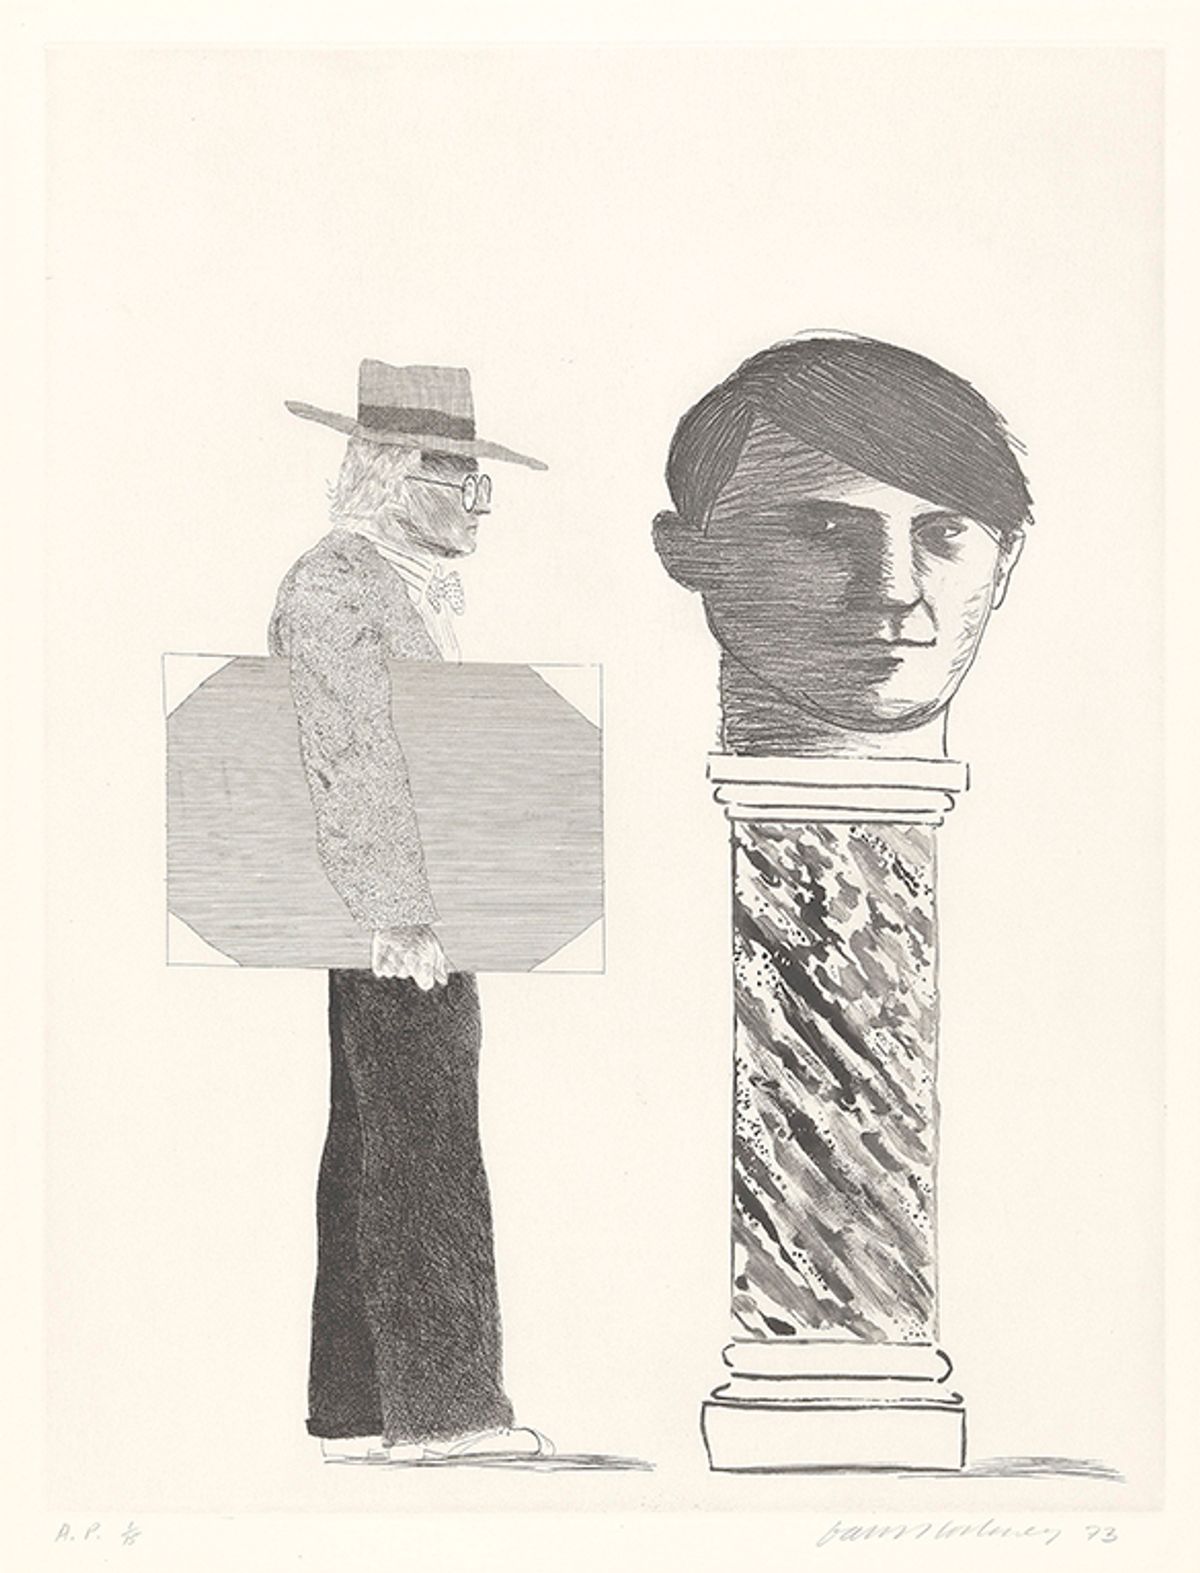 David Hockney's The Student: Homage to Picasso (1973) © David Hockney Collection The David Hockney Foundation